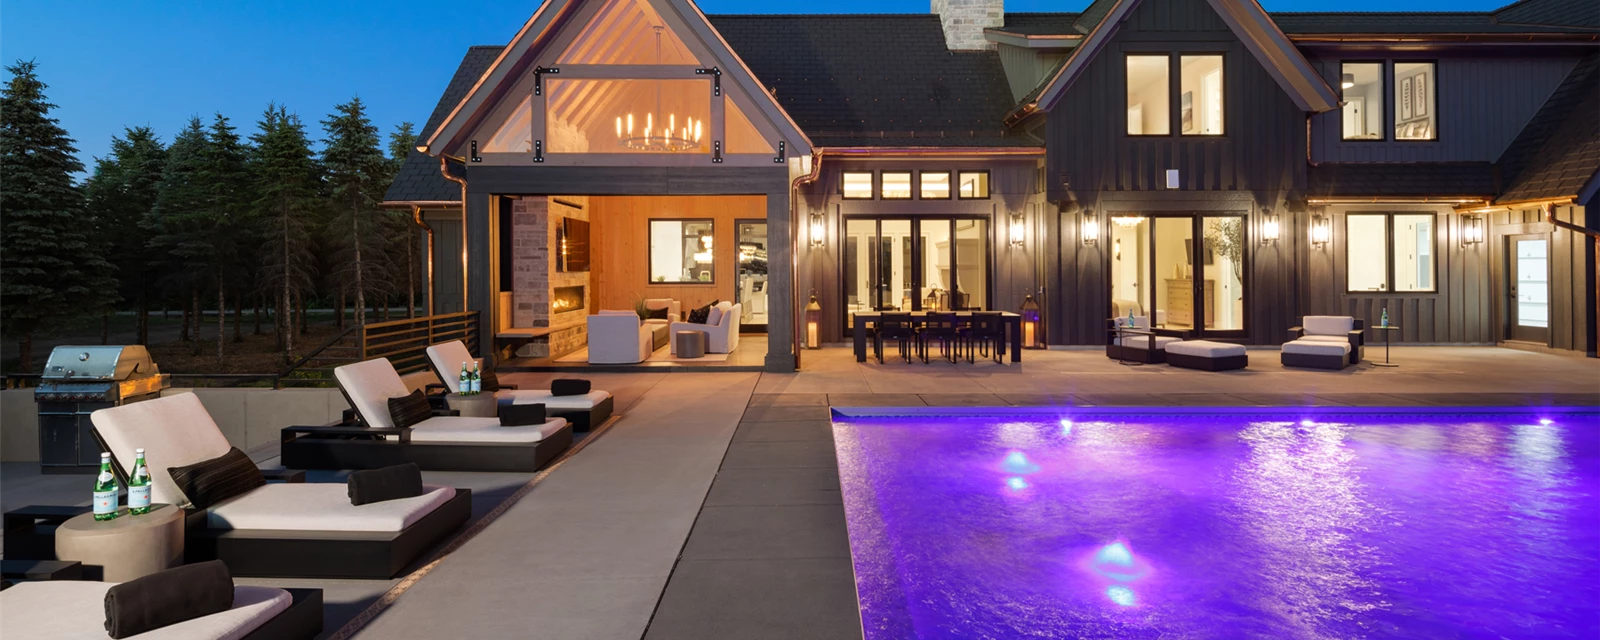 Modern Luxe on Majestic Pines - Exterior Pool Night